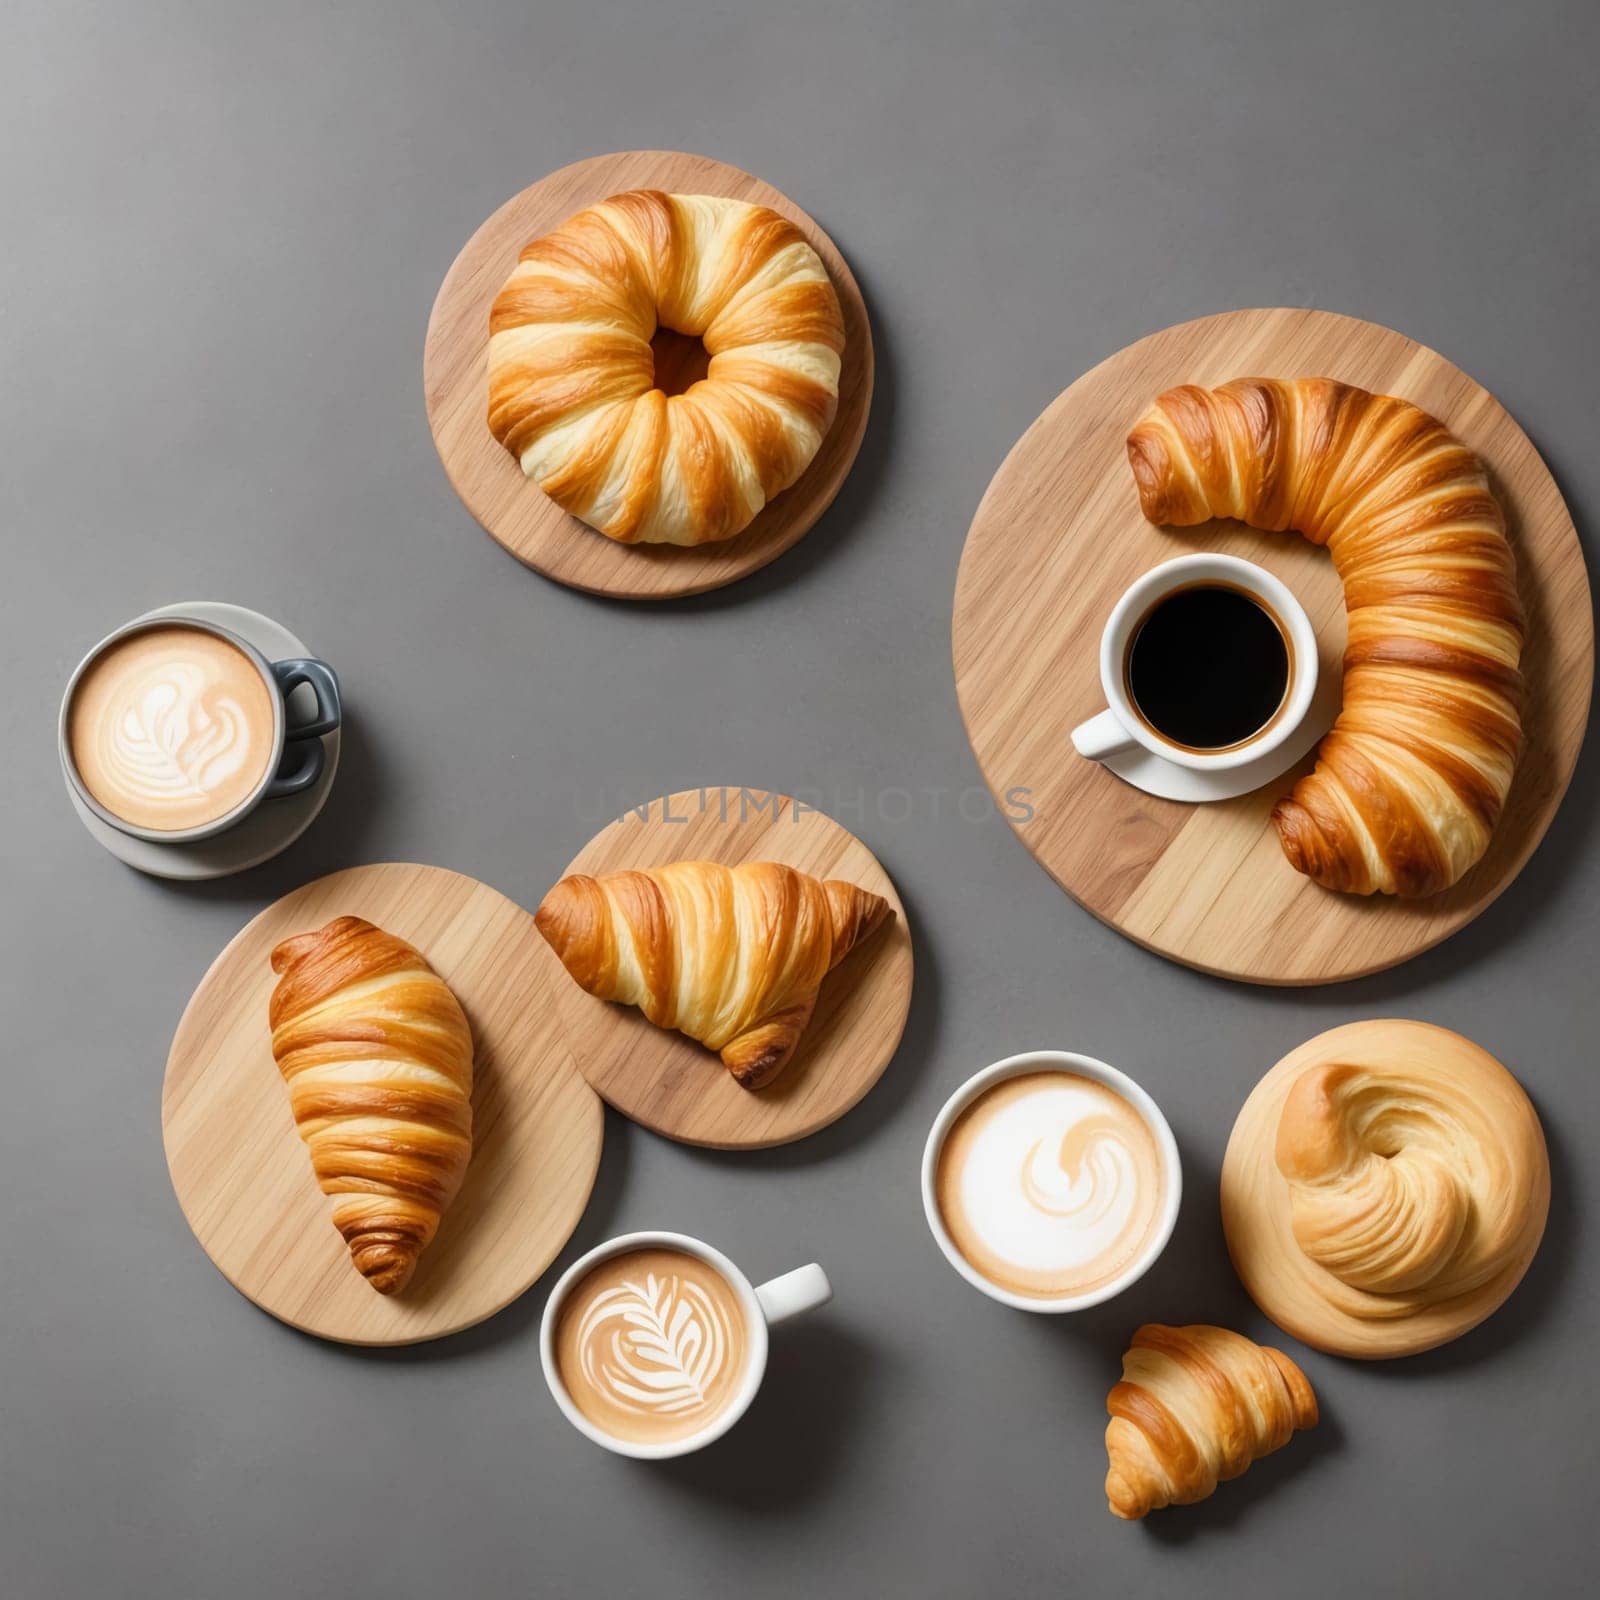 Freshly baked croissants on a wooden board on a gray background by Севостьянов